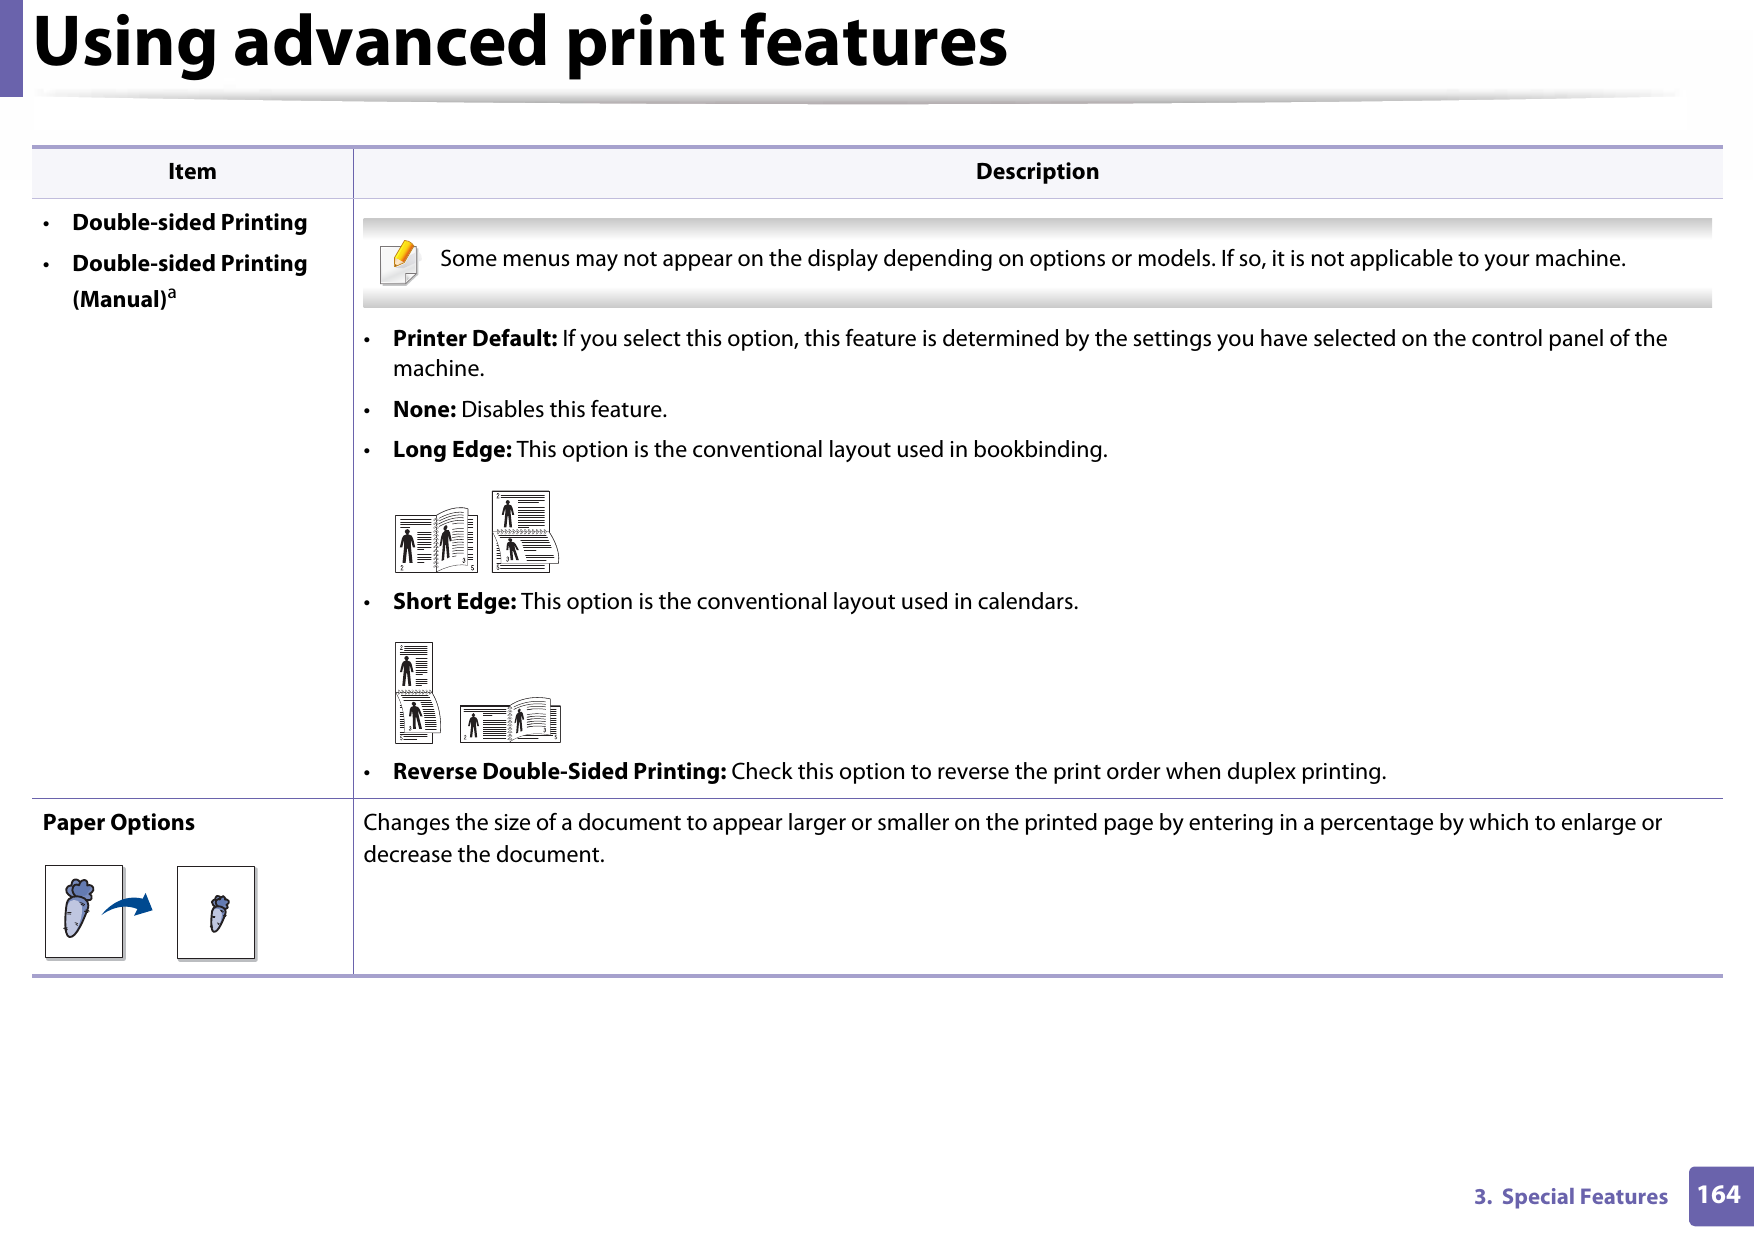 Using advanced print features1643.  Special Features•Double-sided Printing•Double-sided Printing (Manual)a Some menus may not appear on the display depending on options or models. If so, it is not applicable to your machine. •Printer Default: If you select this option, this feature is determined by the settings you have selected on the control panel of the machine. •None: Disables this feature.•Long Edge: This option is the conventional layout used in bookbinding.•Short Edge: This option is the conventional layout used in calendars.•Reverse Double-Sided Printing: Check this option to reverse the print order when duplex printing.Paper Options Changes the size of a document to appear larger or smaller on the printed page by entering in a percentage by which to enlarge or decrease the document.Item Description